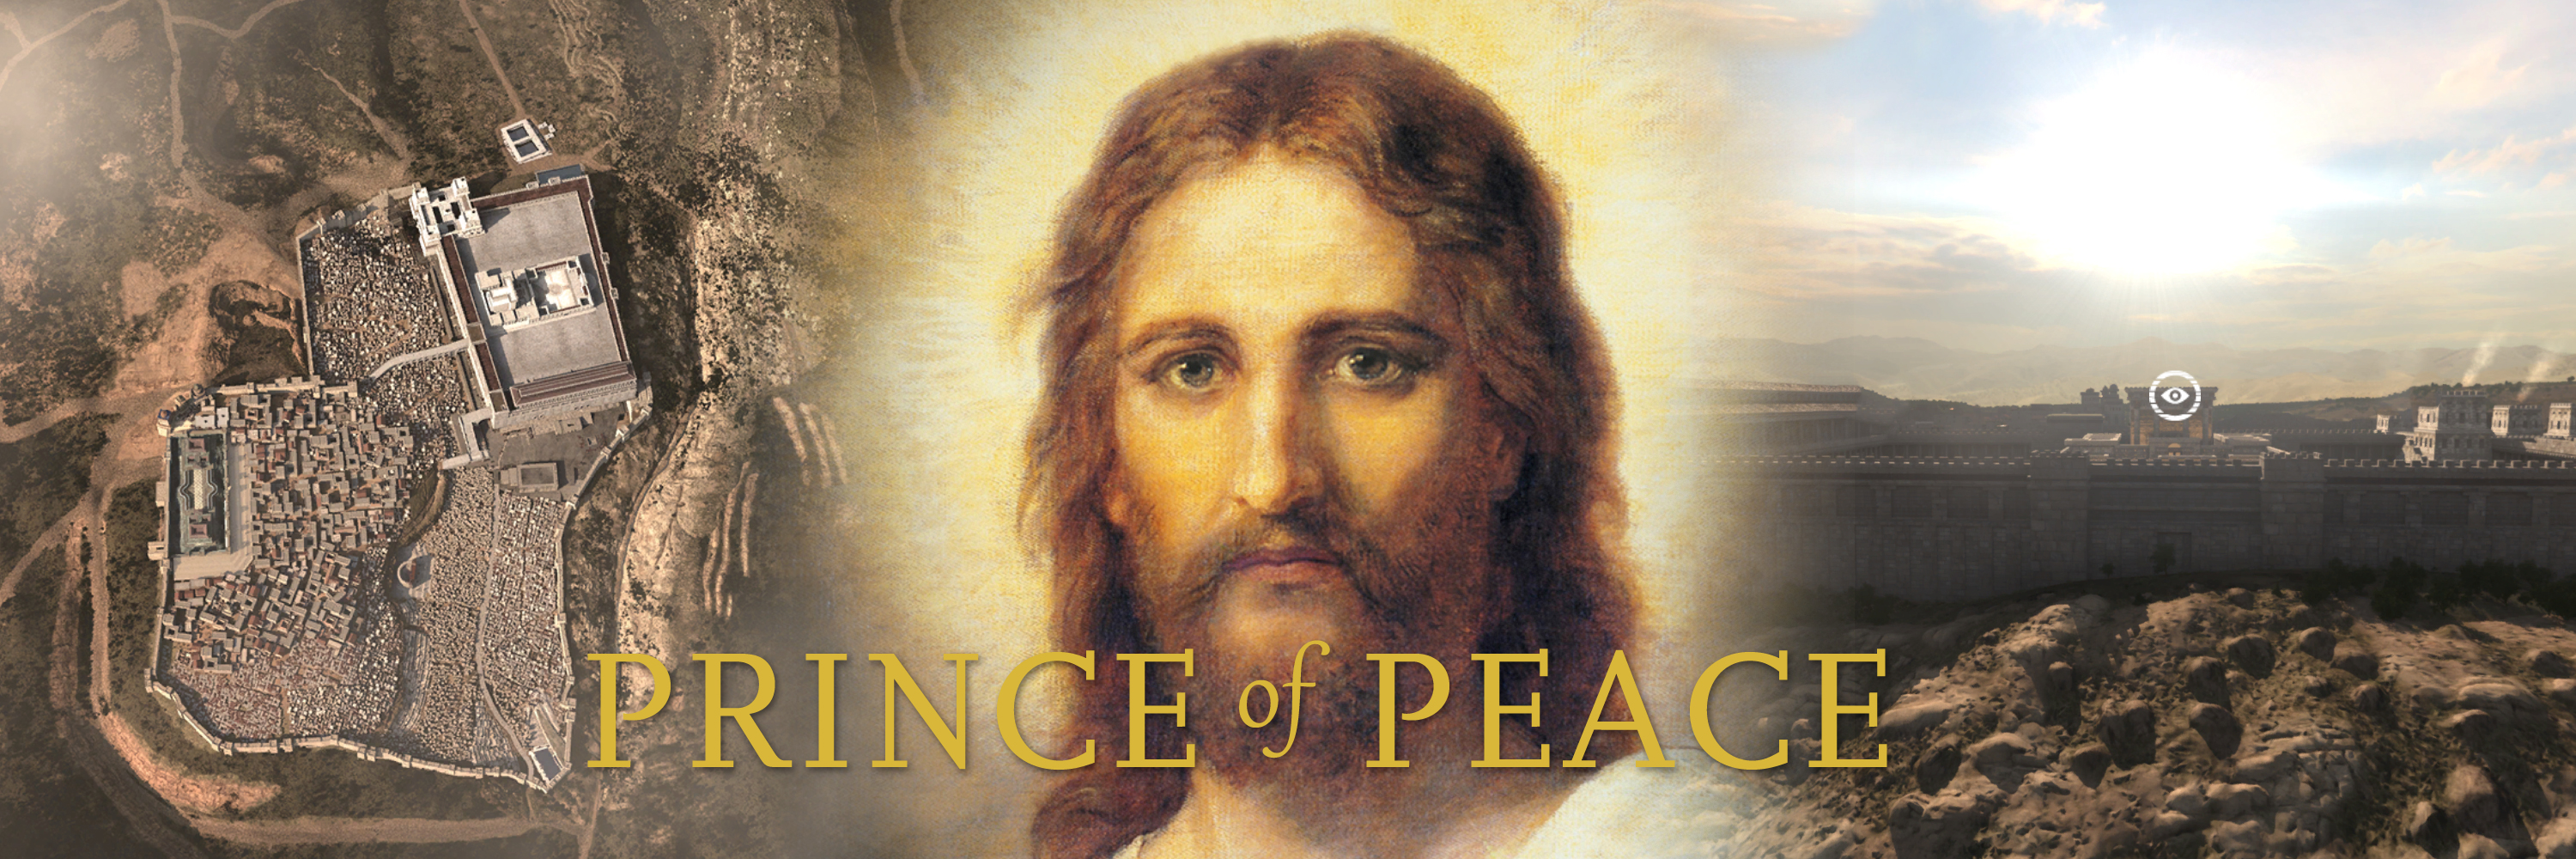 Prince of Peace banner featuring BYU's Virtual New Testament App